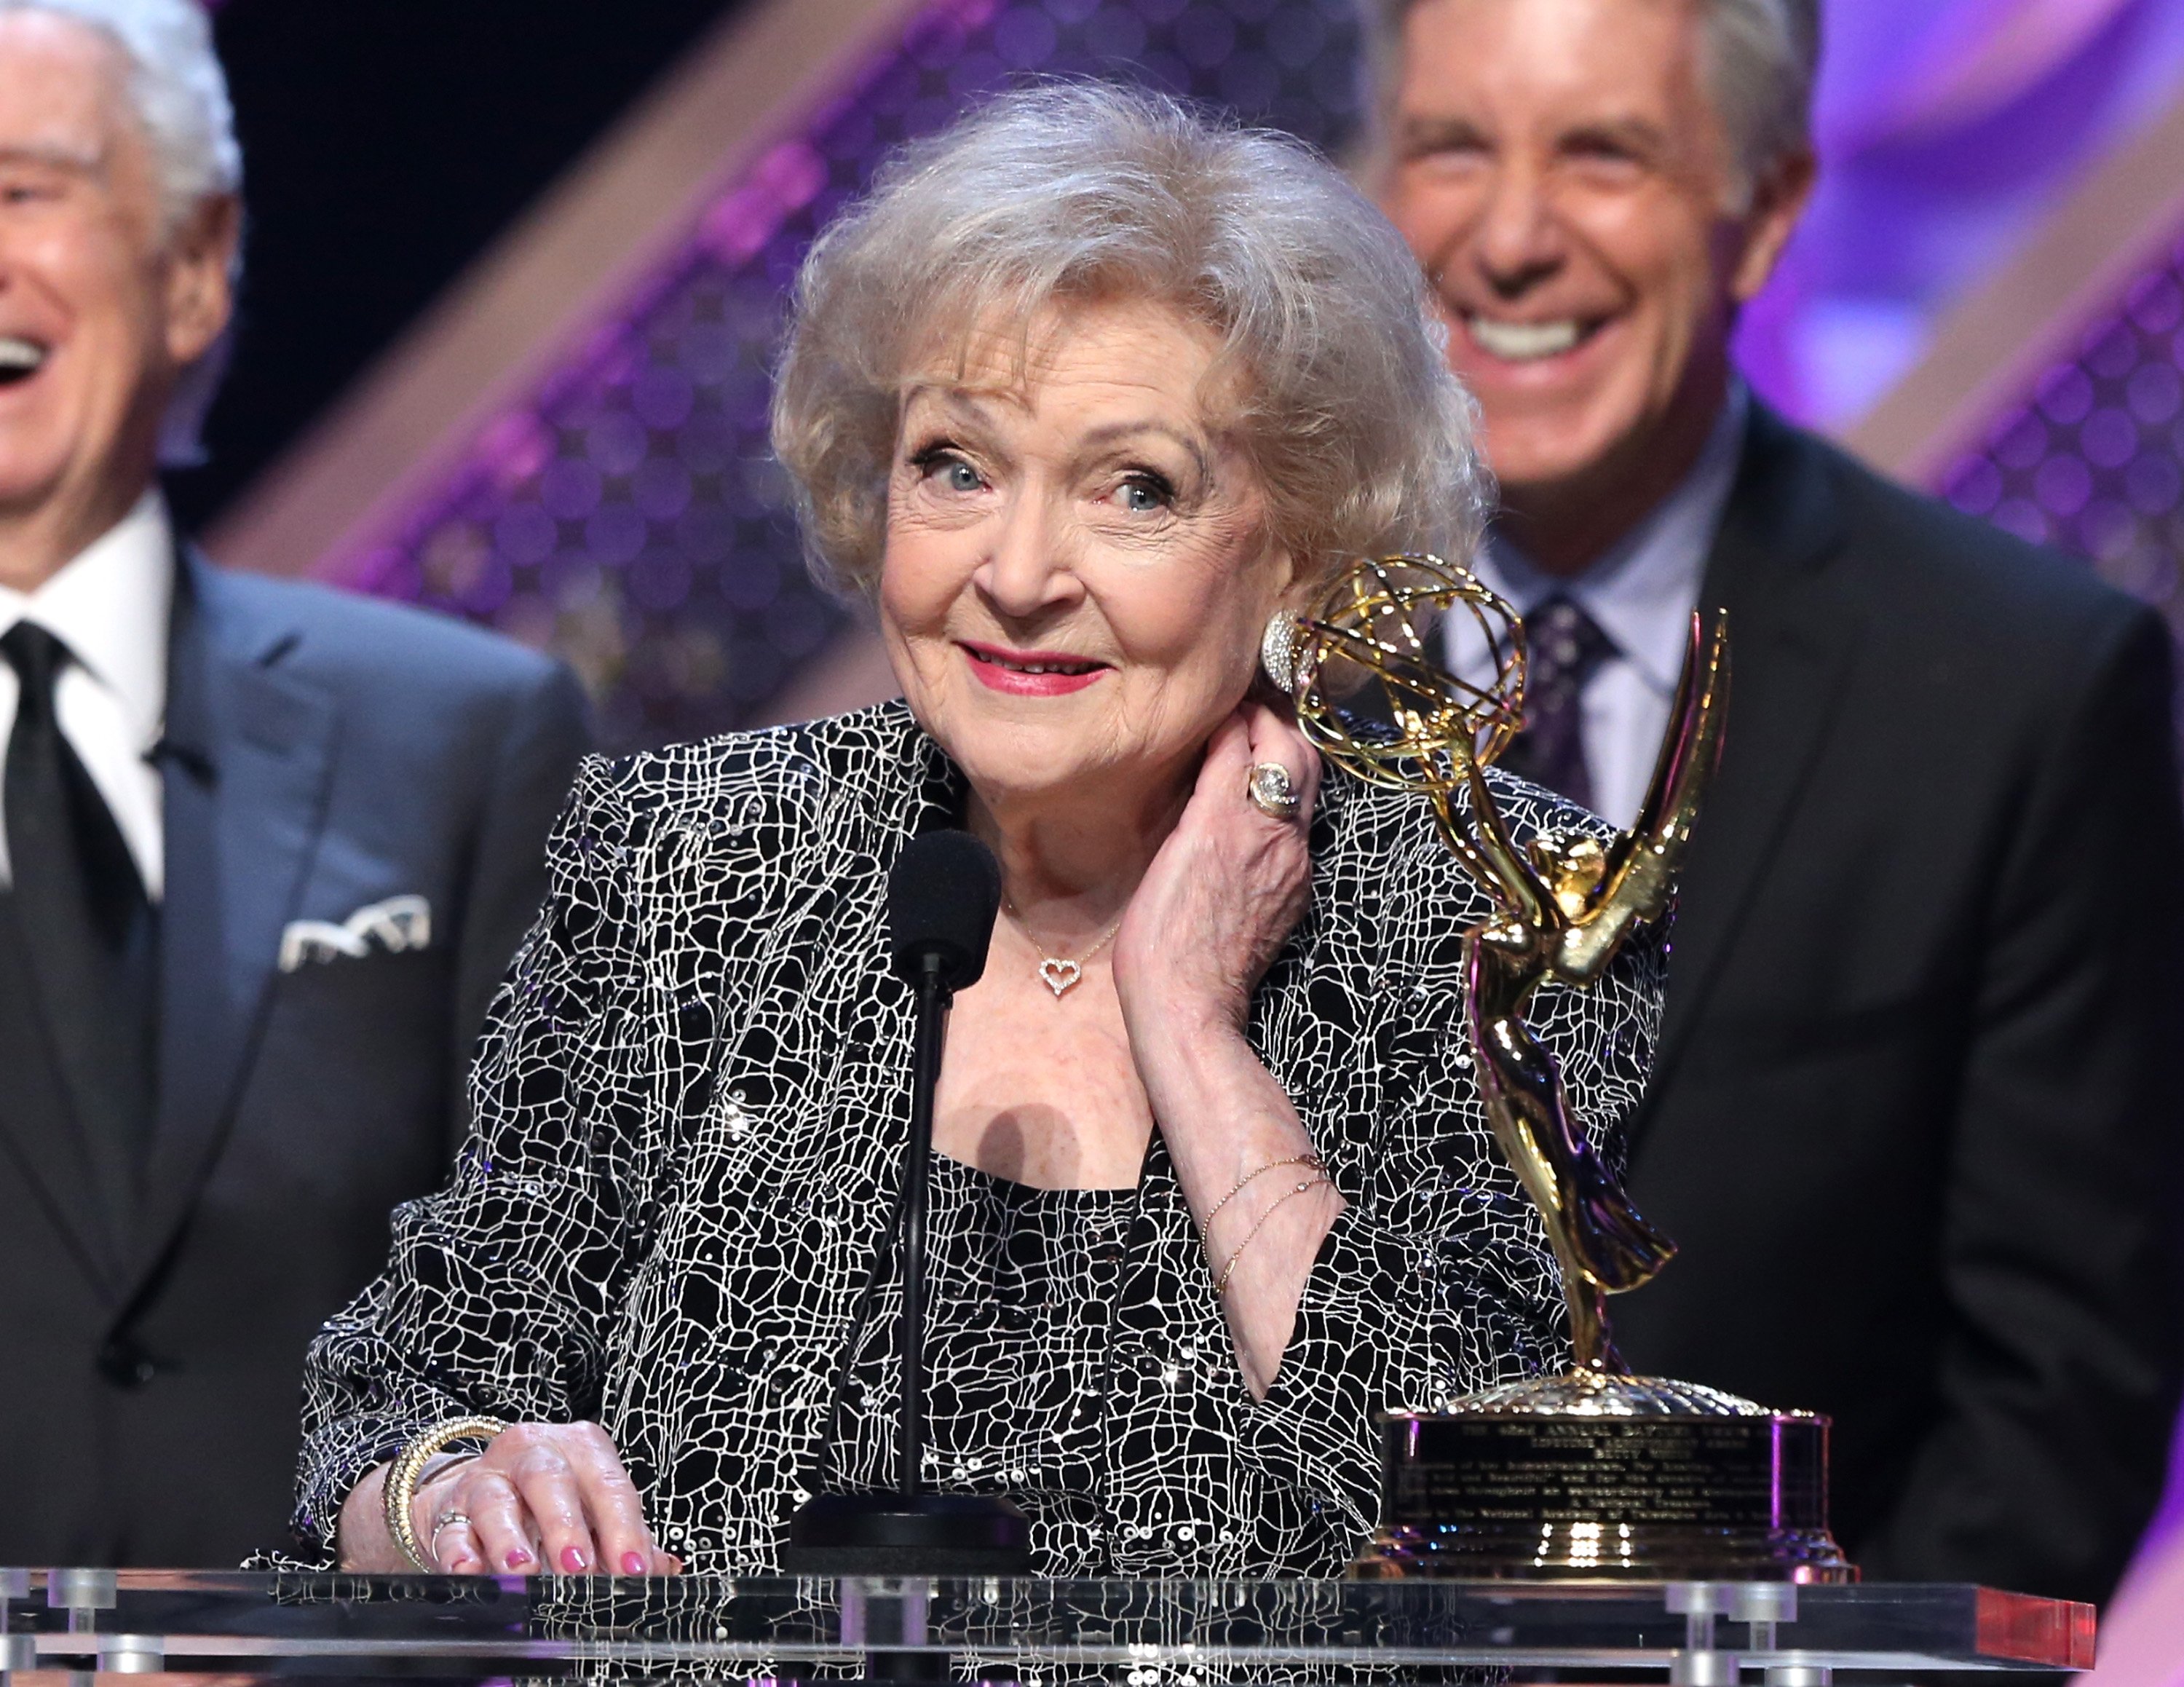 Betty White at the 42nd Annual Daytime Emmy Awards on April 26, 2015 | Photo: GettyImages